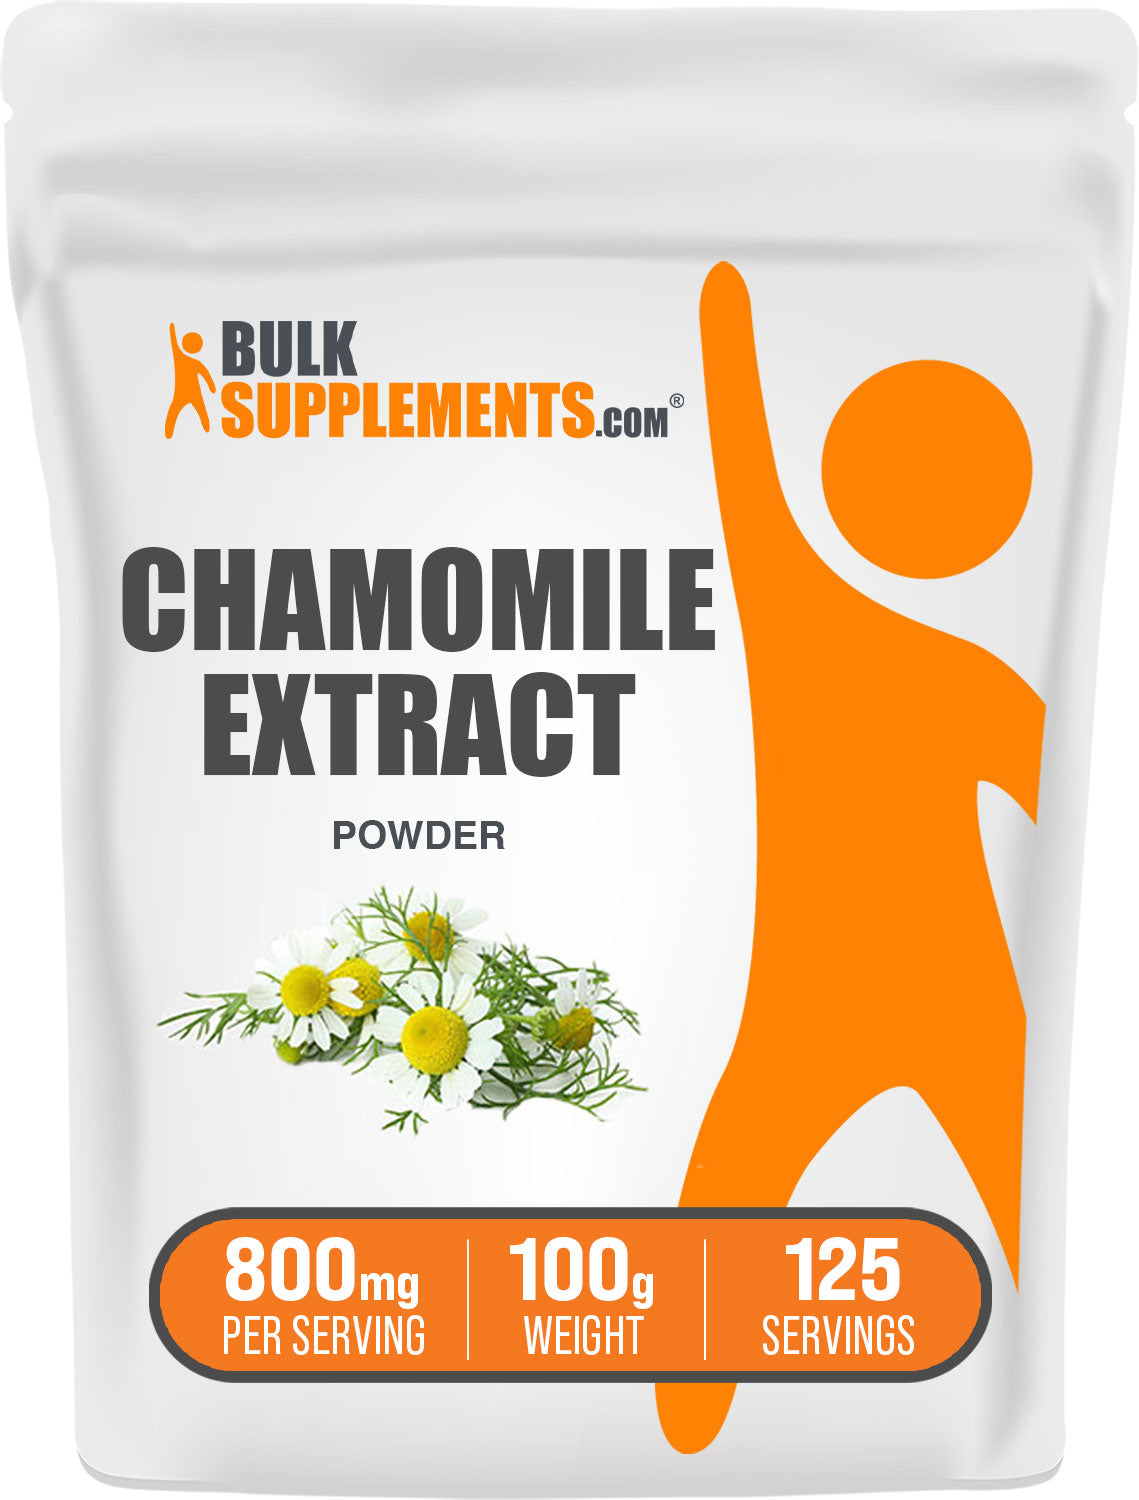 100g of chamomile extract